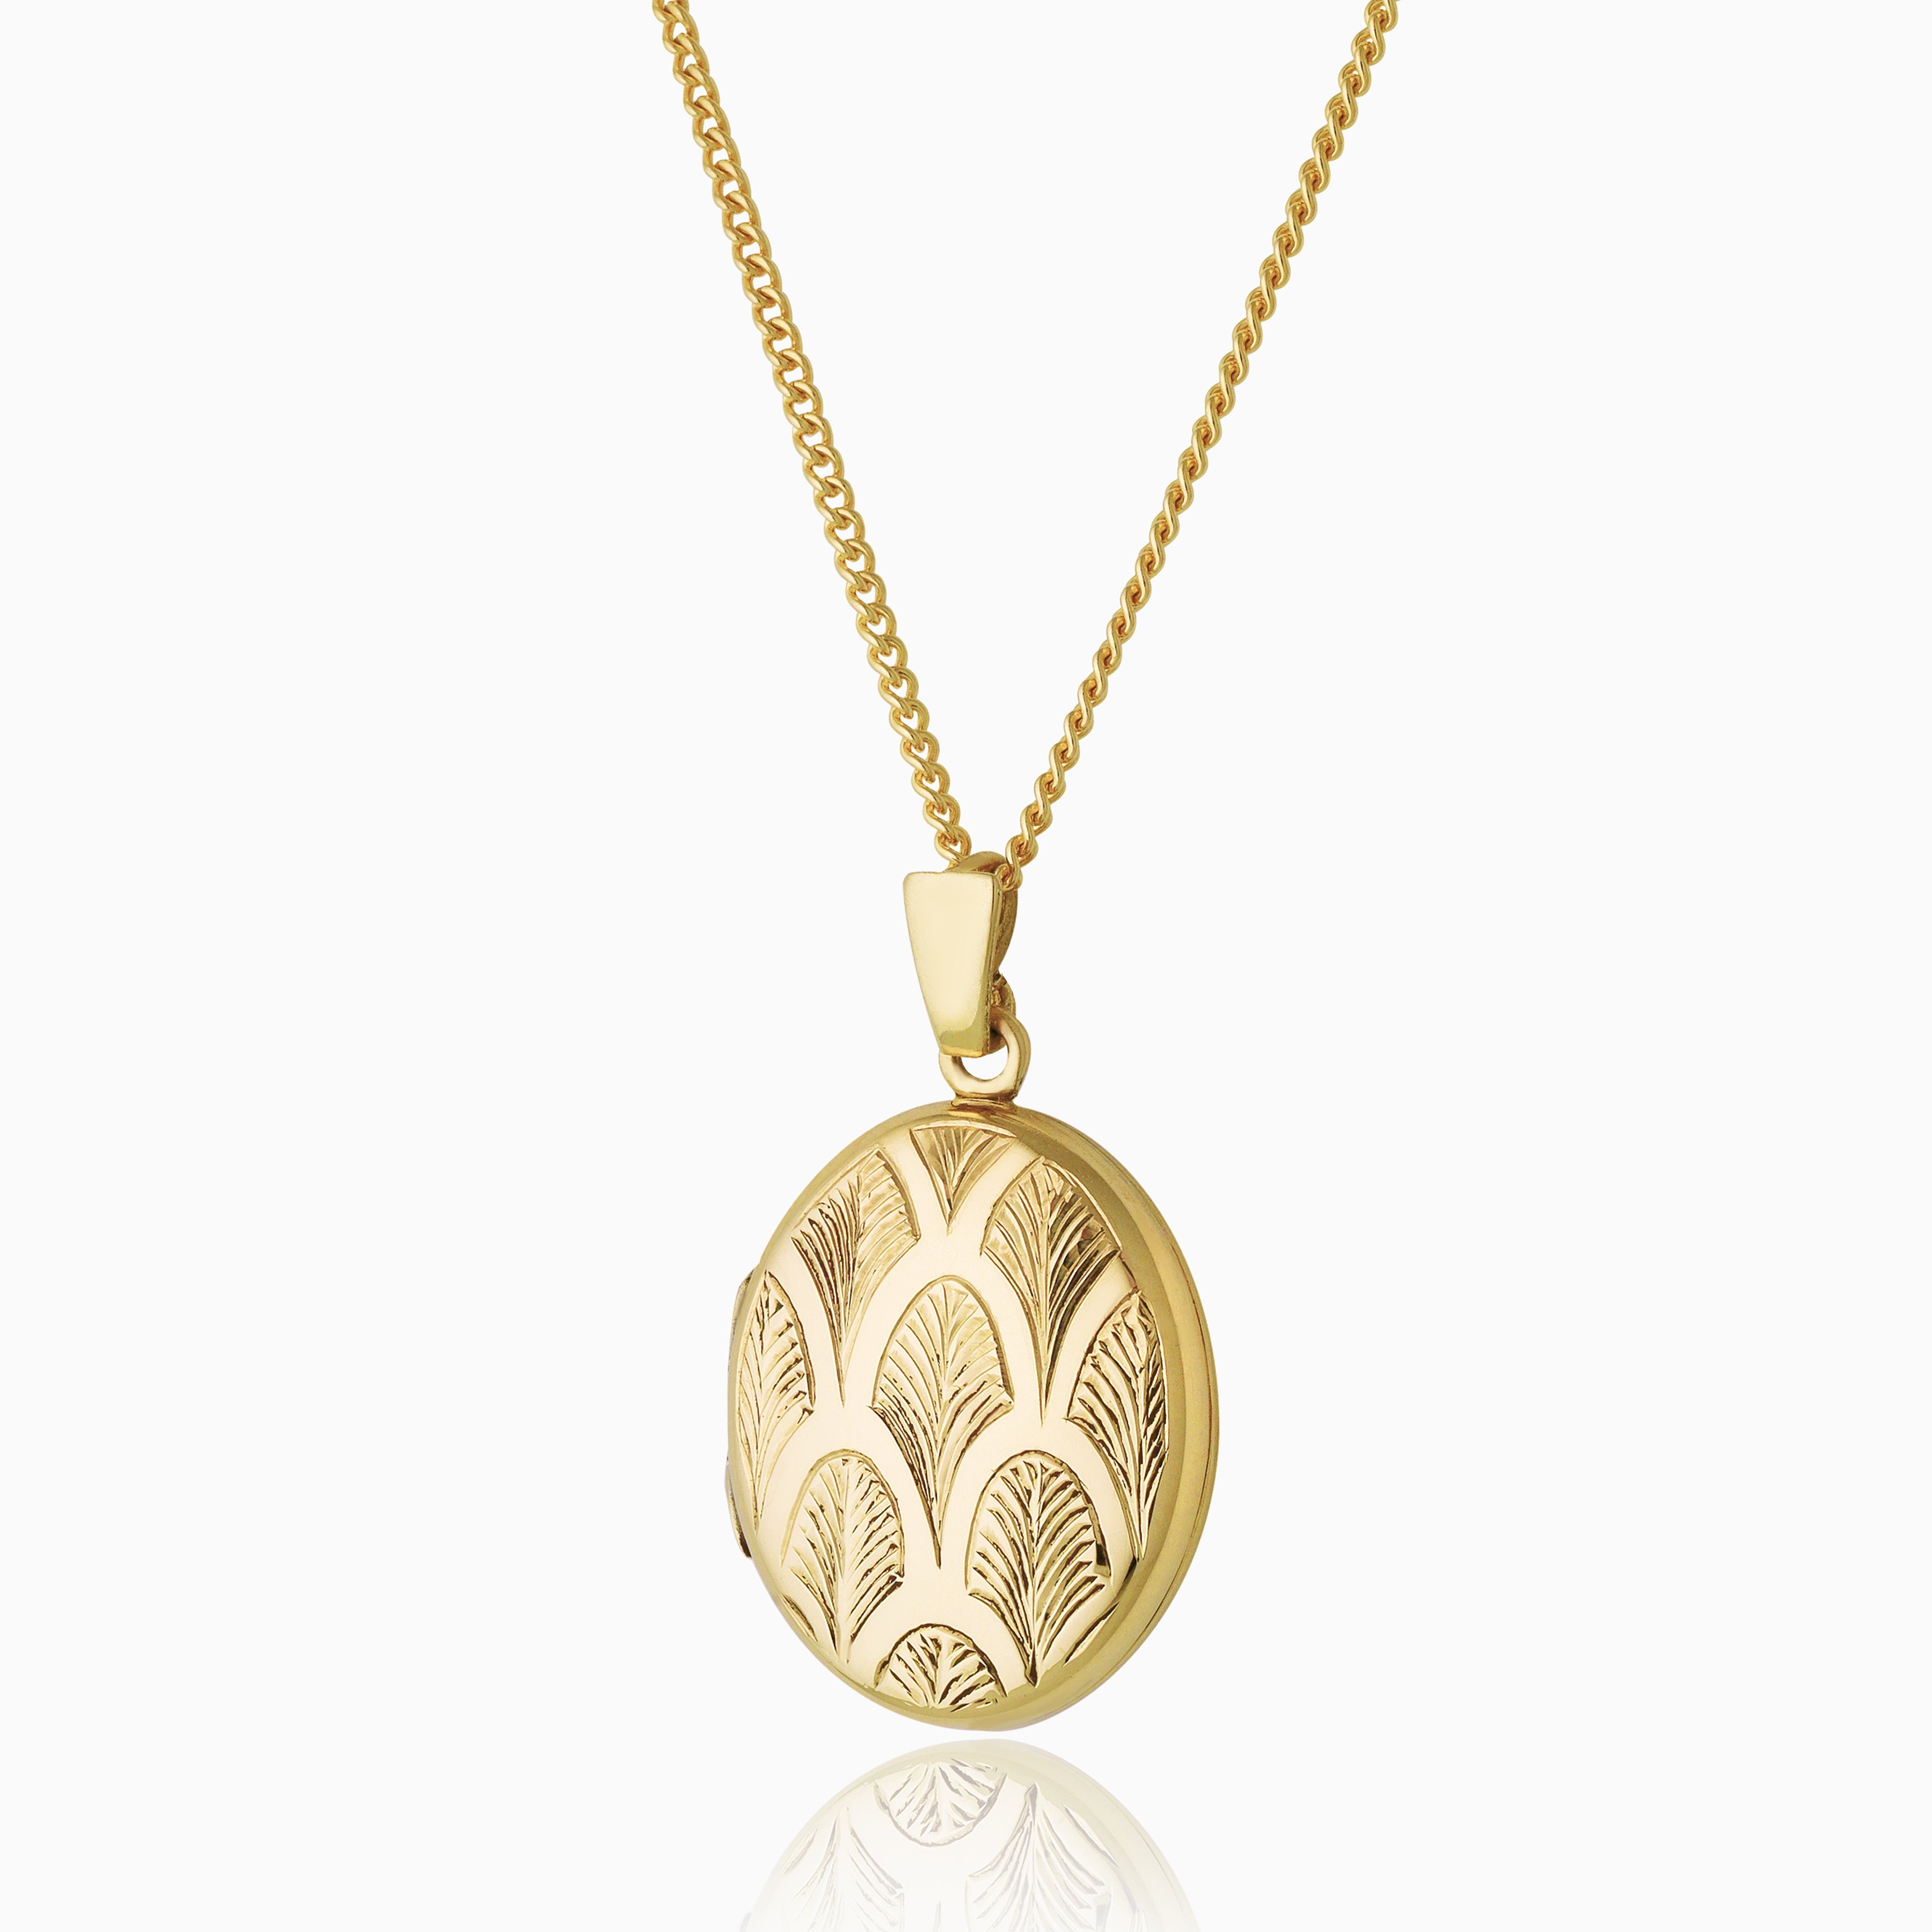 Product title: Gold Palmette Locket, product type: Charms & Pendants